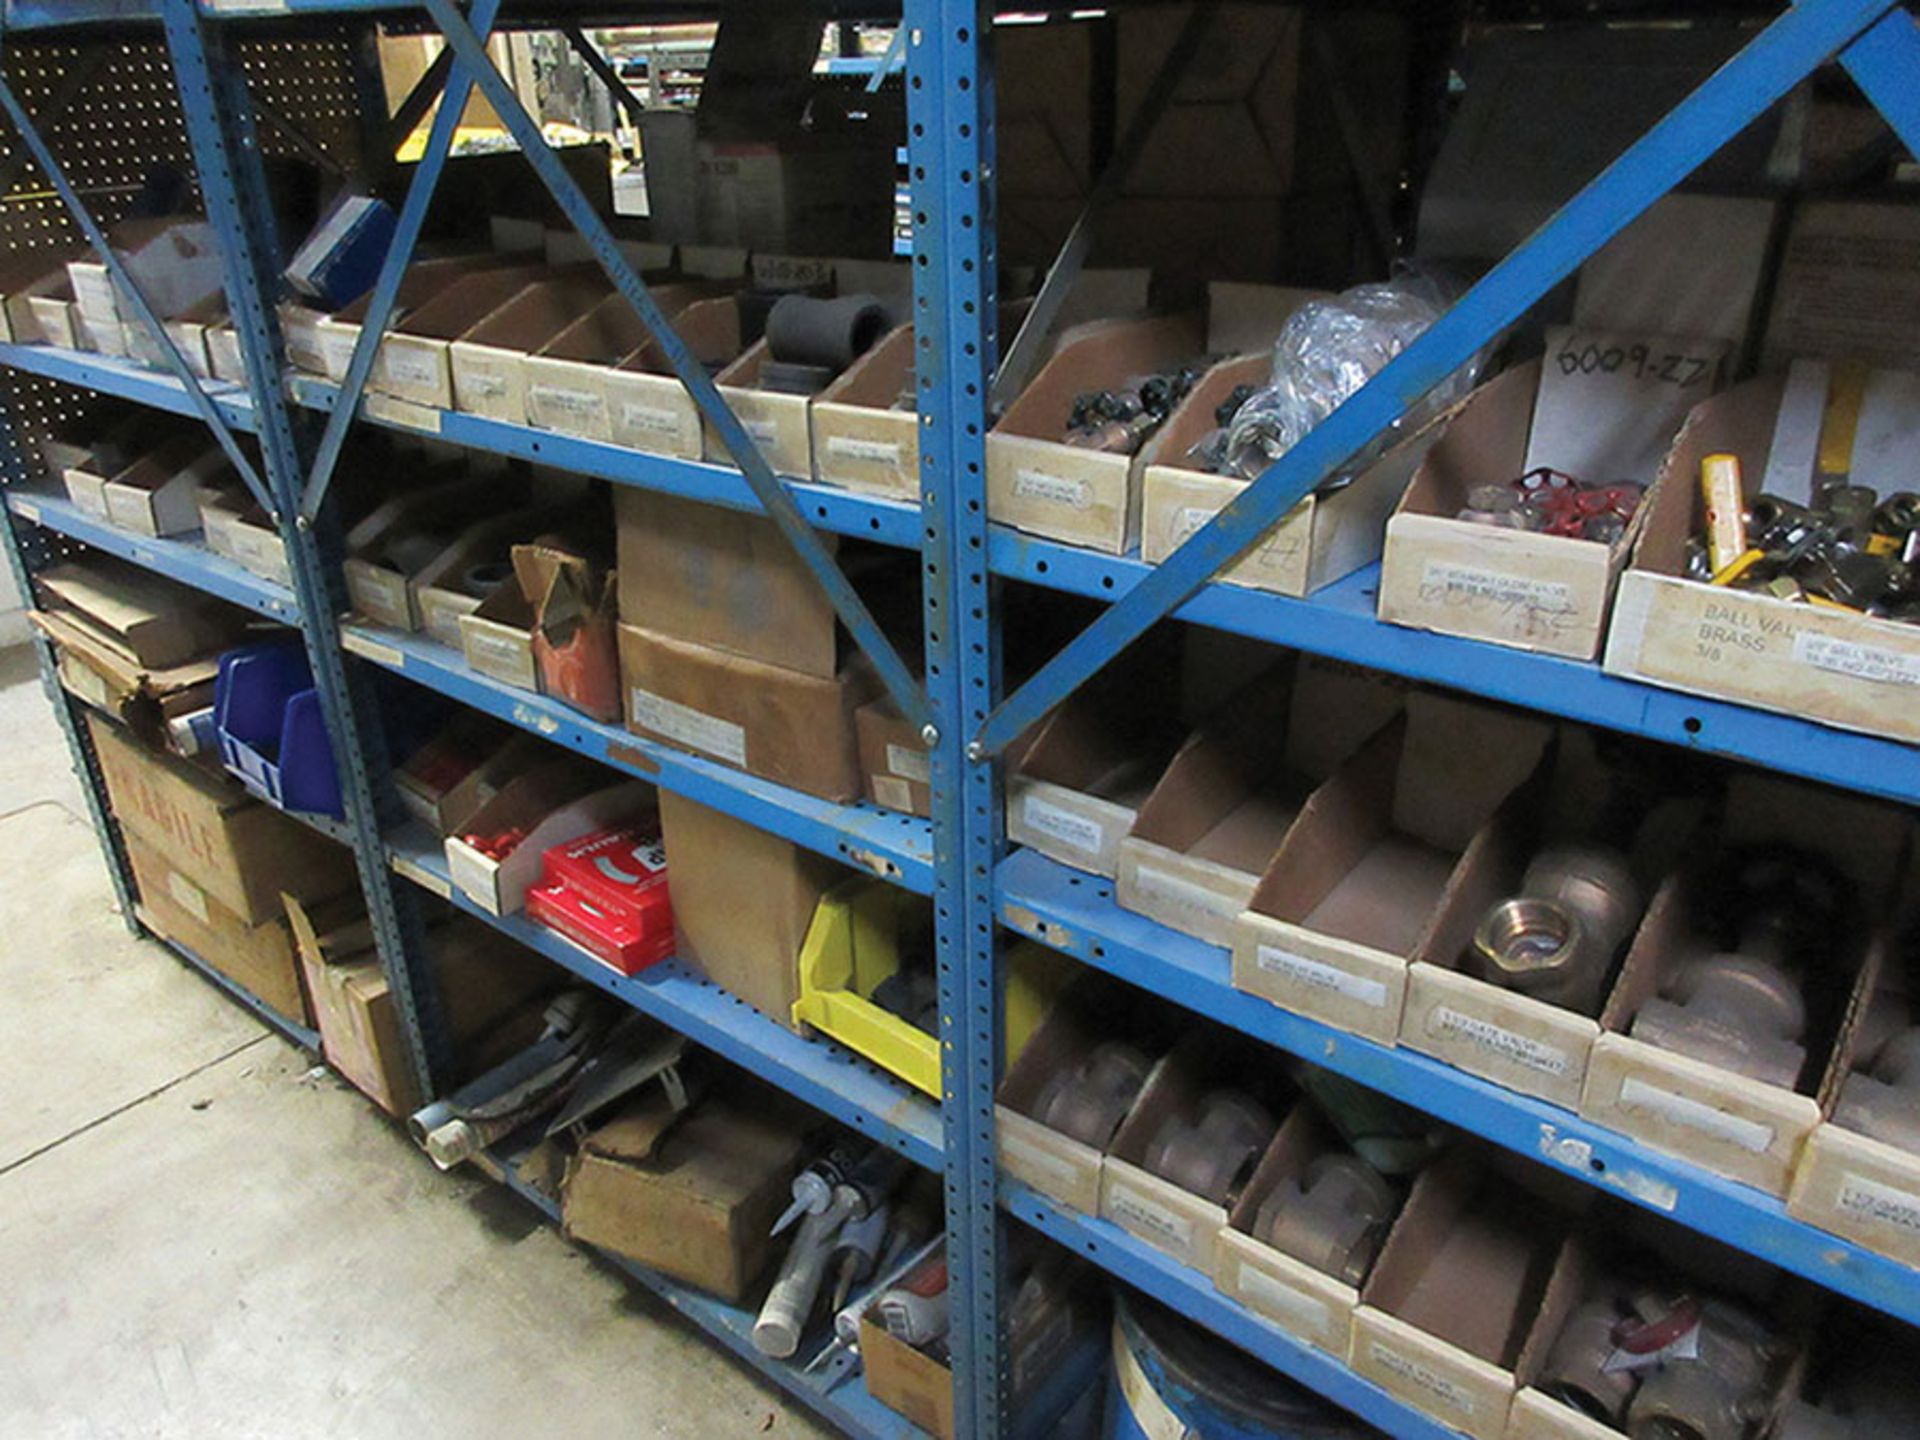 CONTENTS ON LOWER SECTION OF SHELF UNIT: DIE SPRINGS, GATE VALVES, COUPLINGS, UNIONS, AND TEES *** - Image 4 of 8